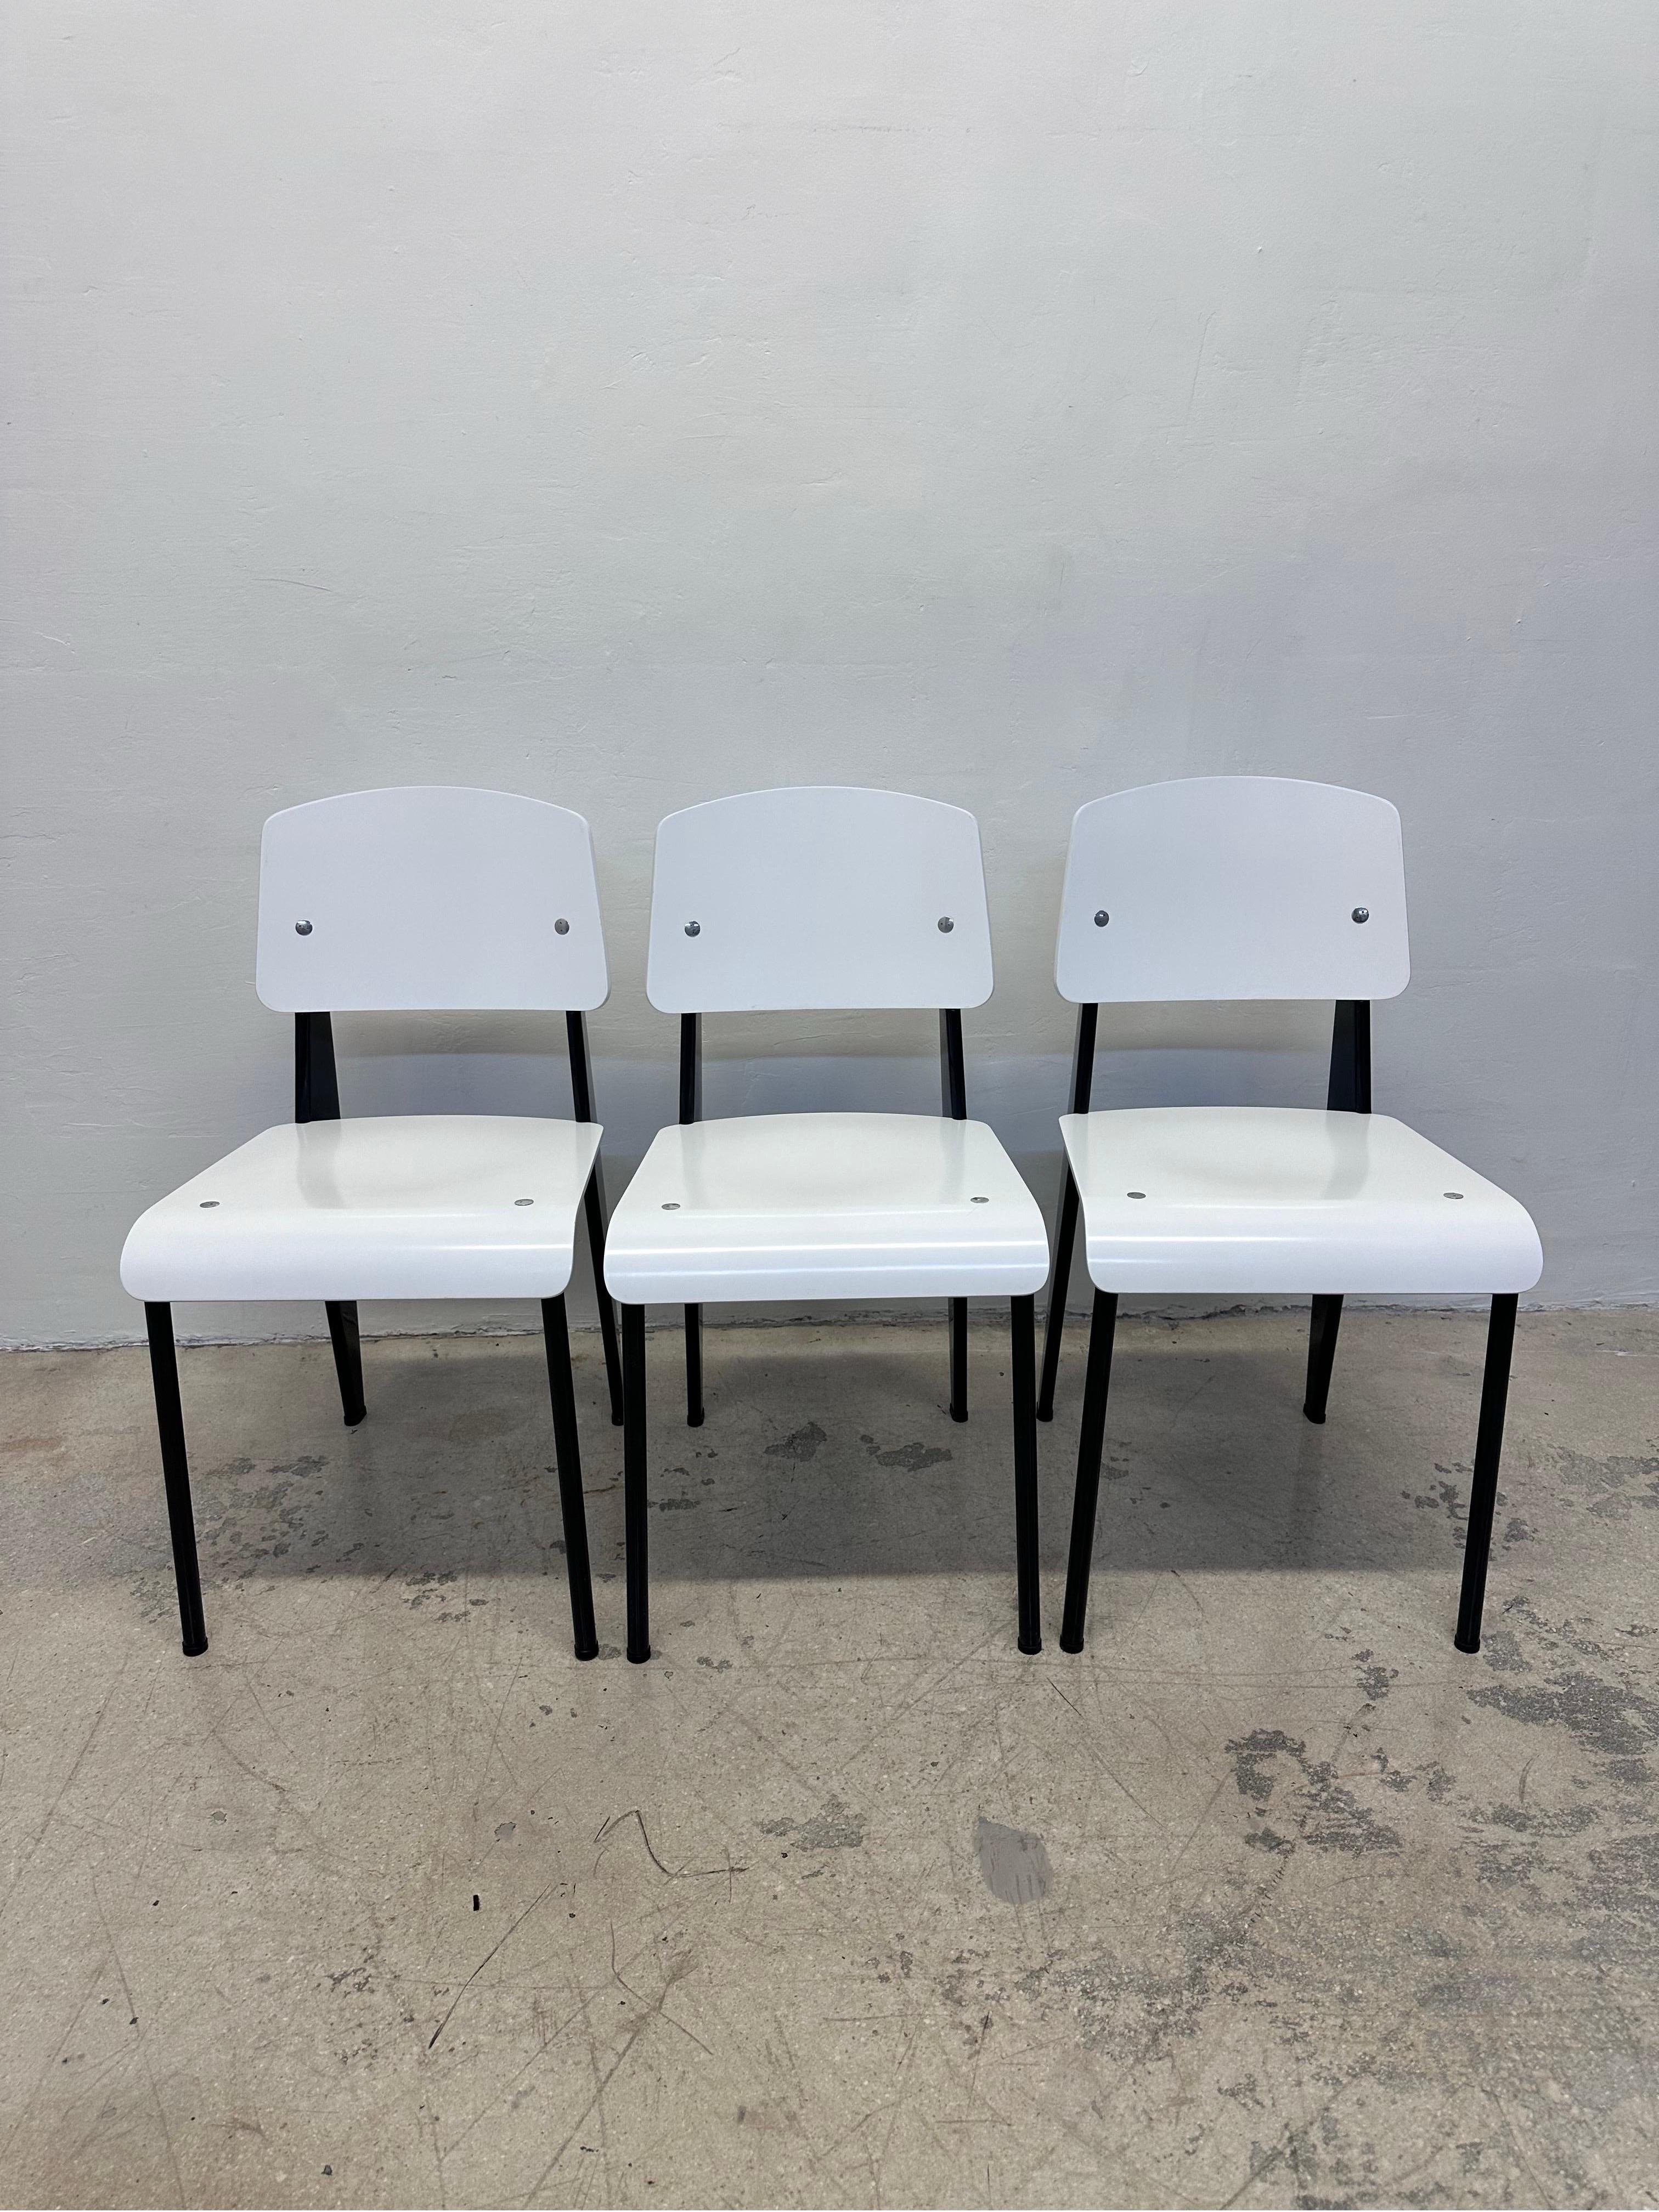 Set of three Standard chairs with white lacquered seats and backs on a black lacquered steel frame by Jean Prouve for Vitra. 

The wood seats and backrests look to have been re-lacquered over an original black finish.